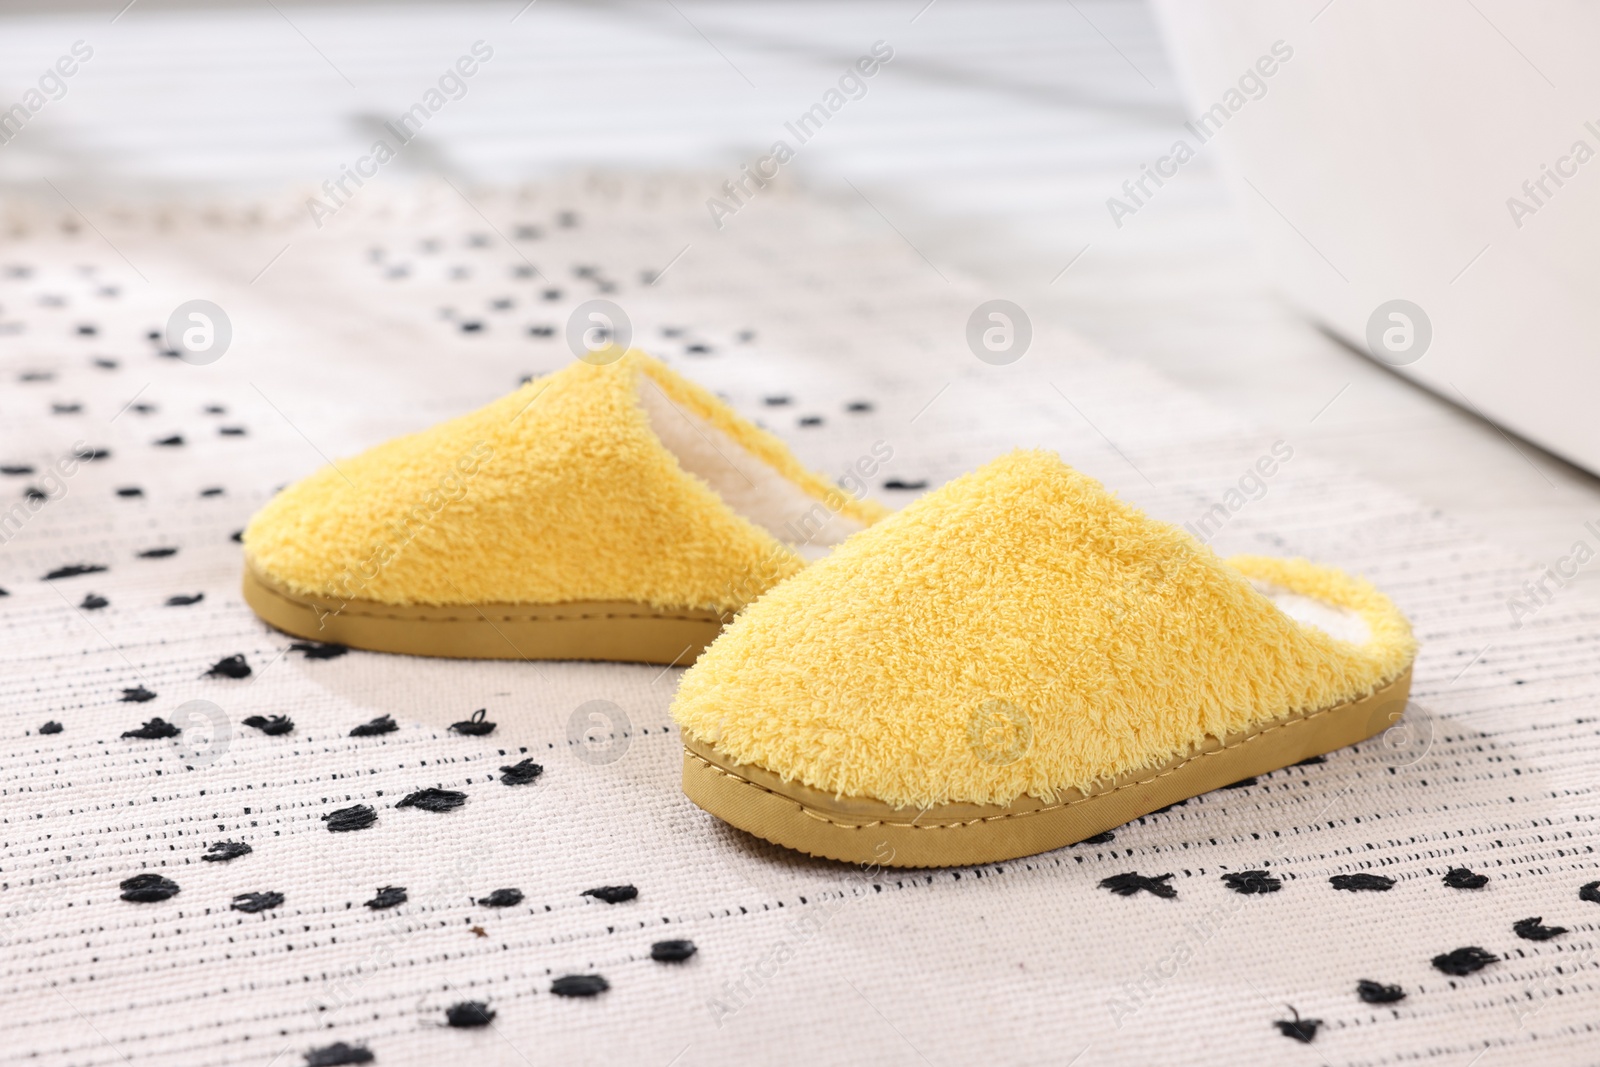 Photo of Yellow soft slippers on carpet at home, closeup